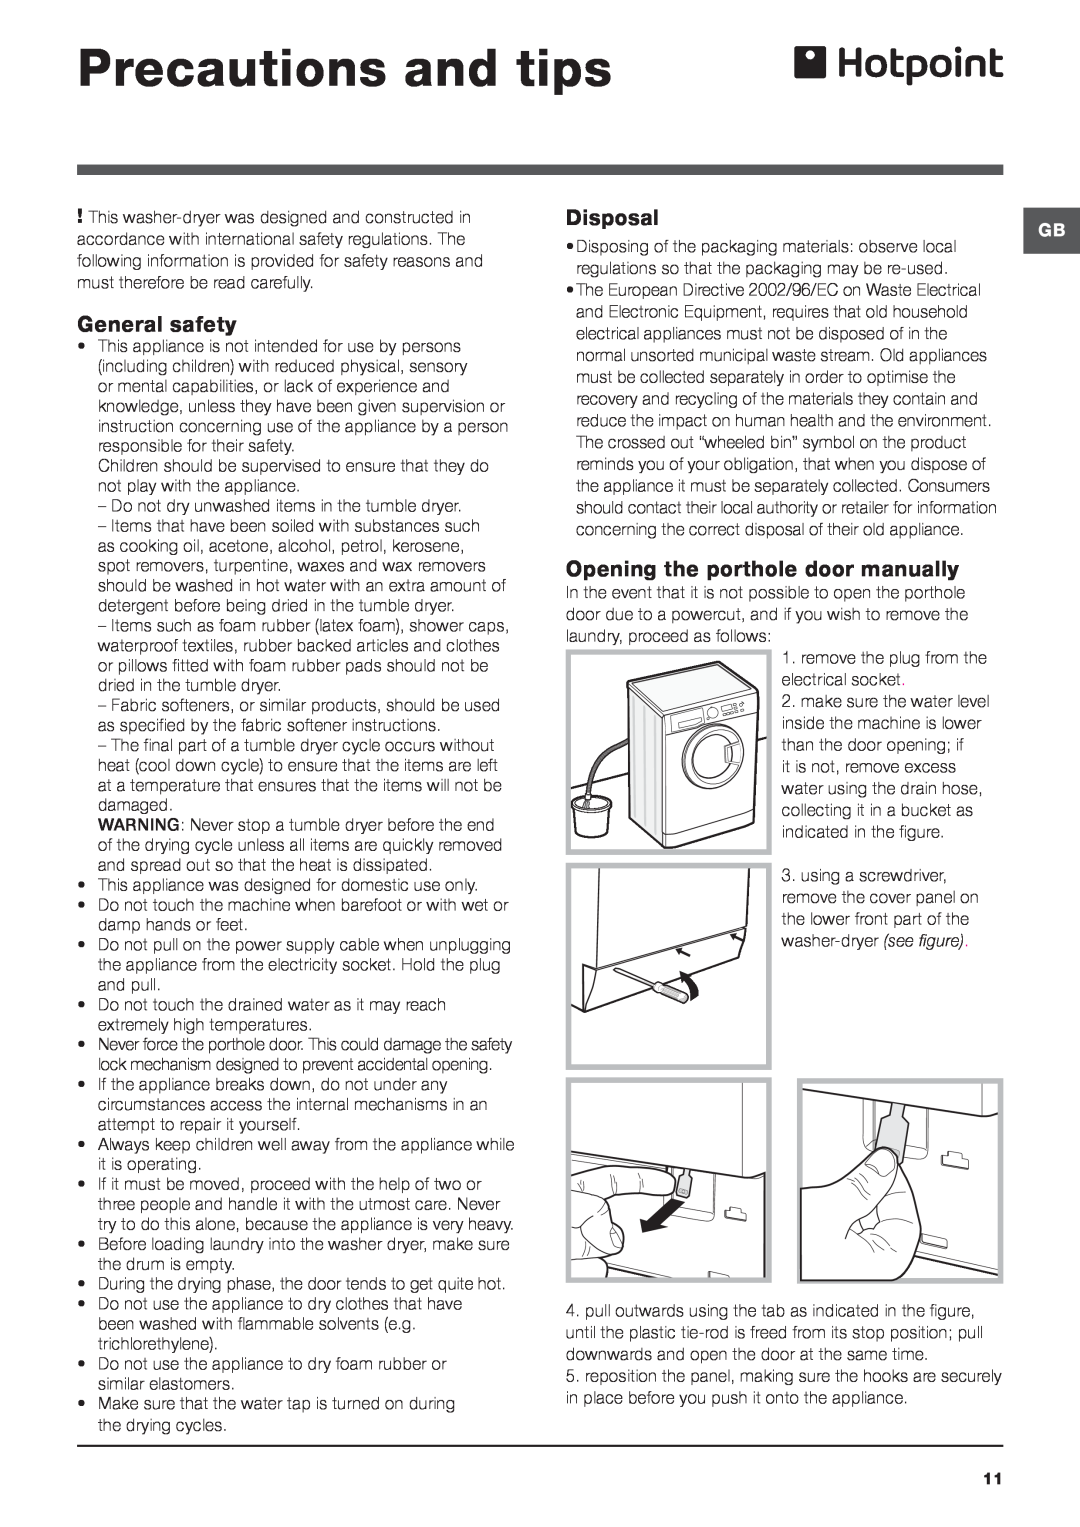 Hotpoint WDPG instruction manual Precautions and tips, General safety, Disposal, Opening the porthole door manually 